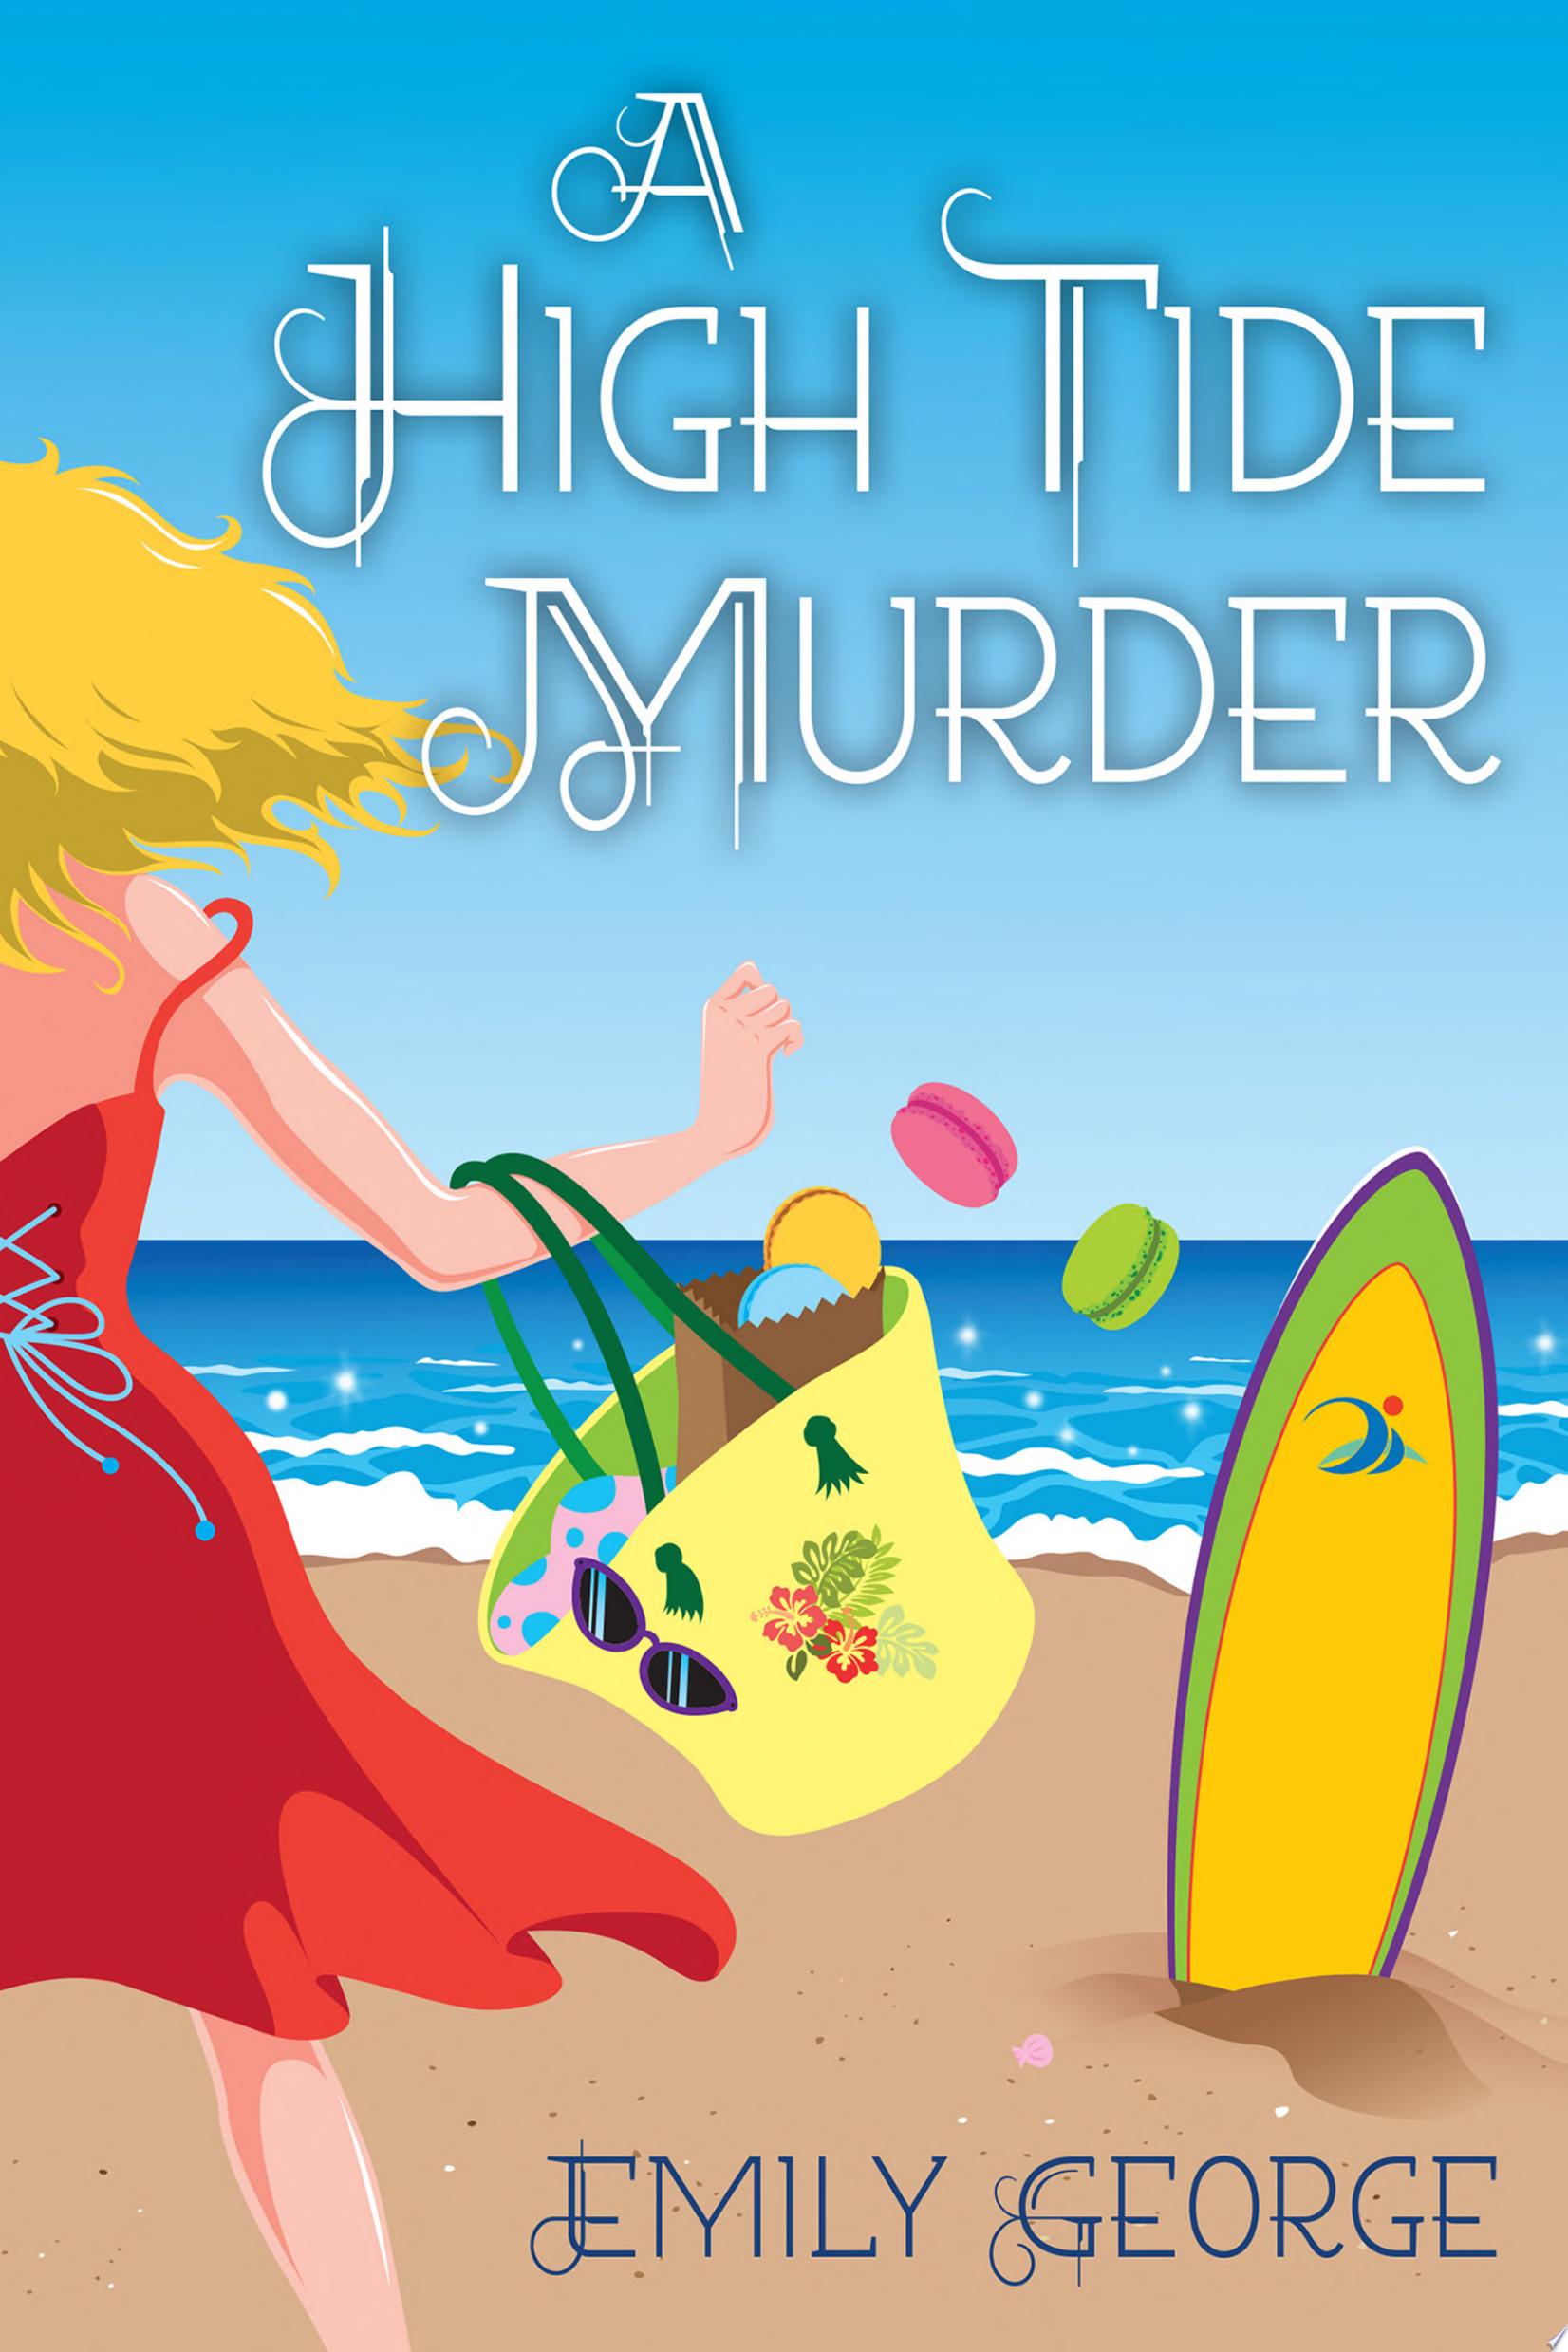 Image for "A High Tide Murder"